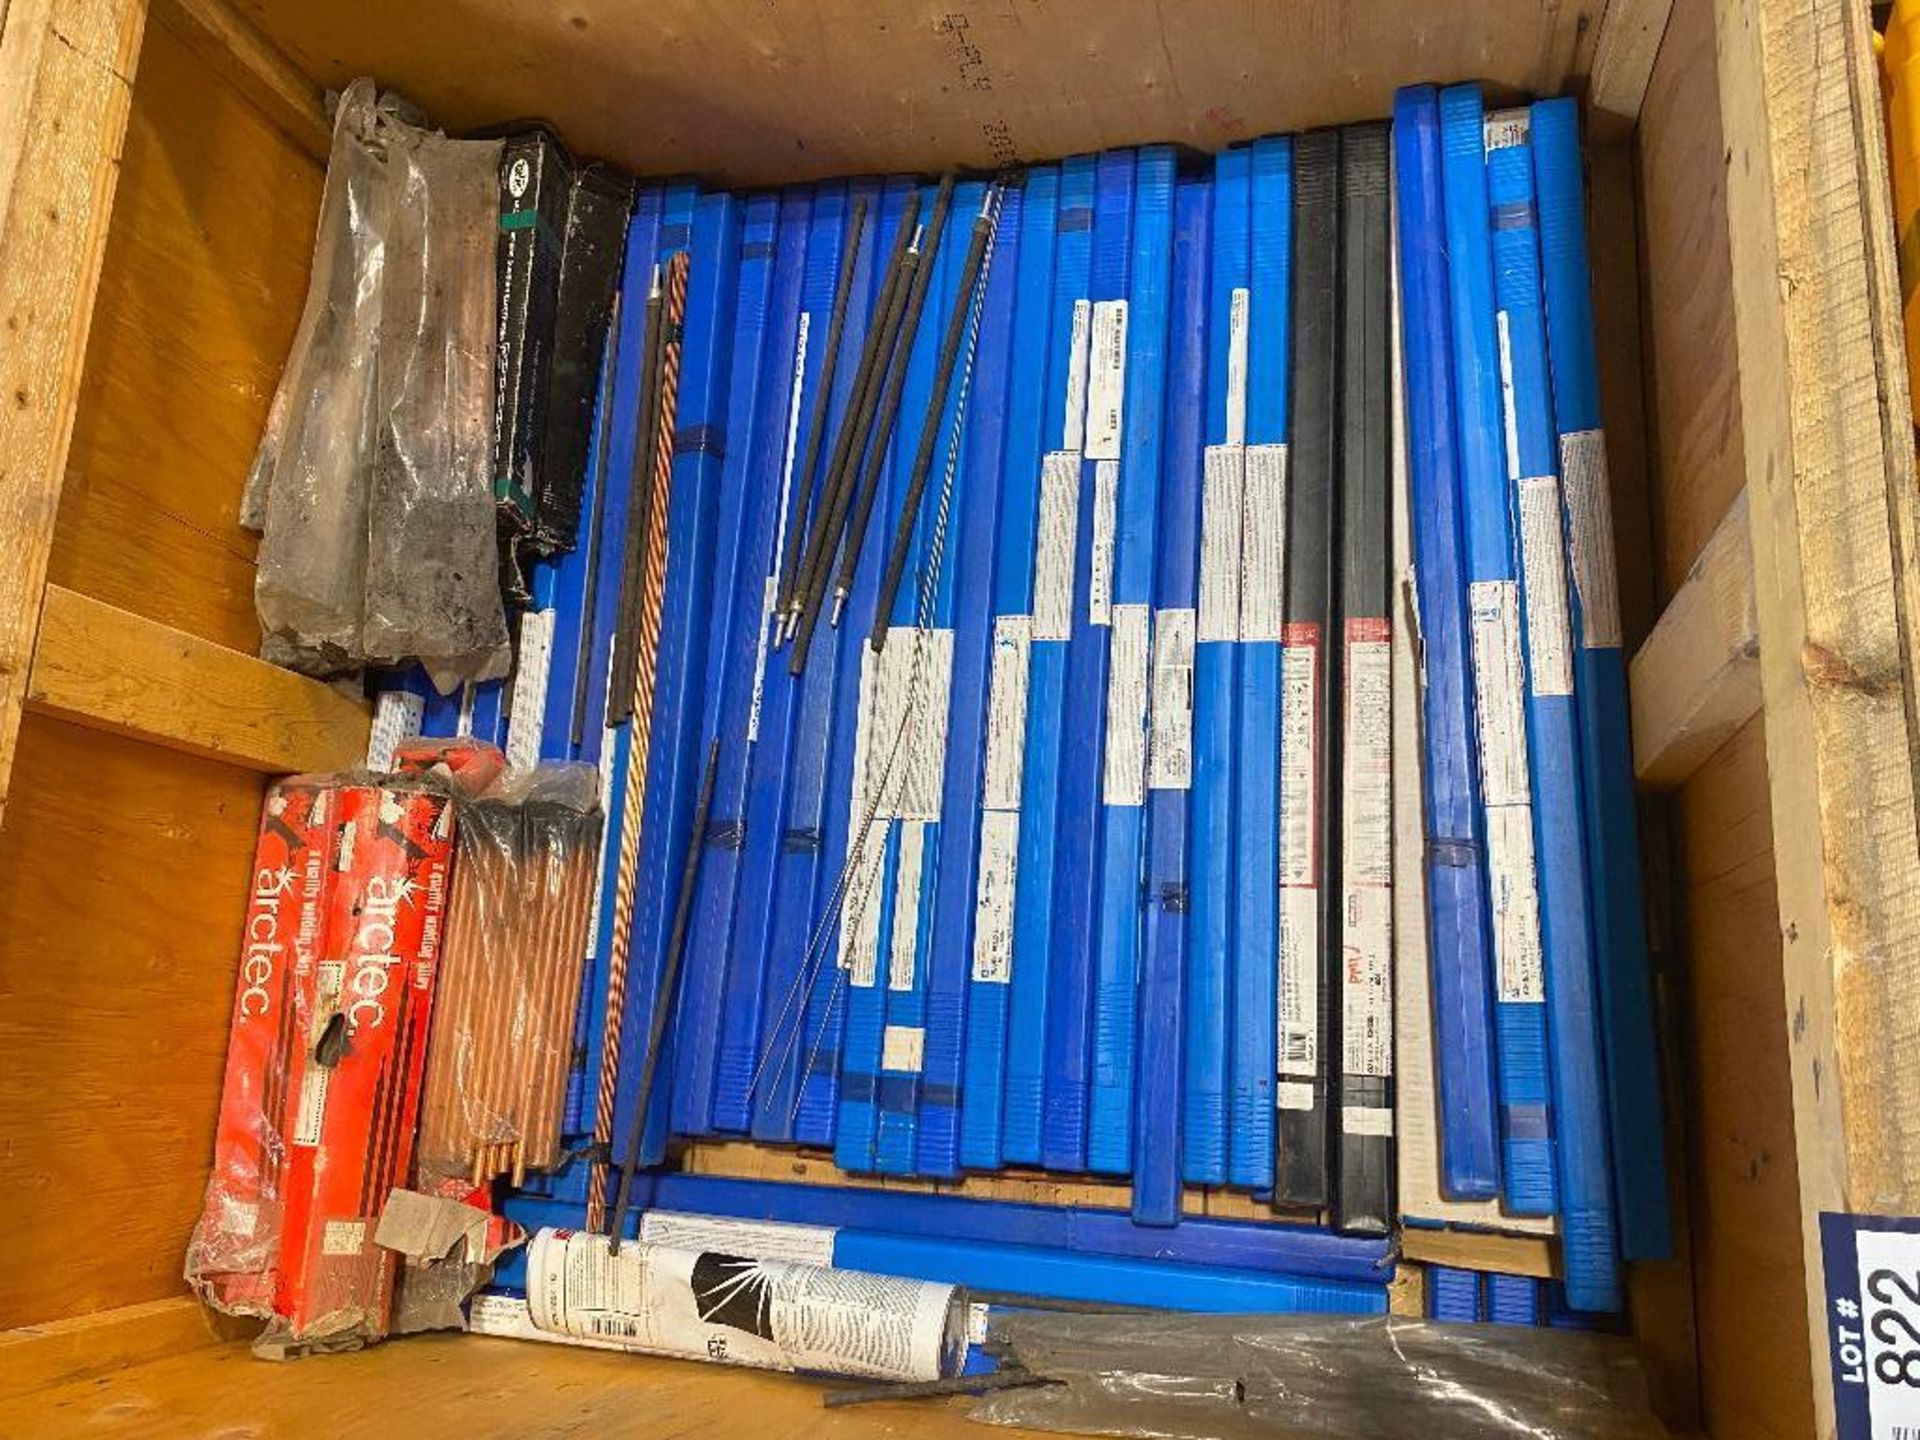 Lot of Asst. Welding Wire, Electrodes, etc. (Crate Not Included)